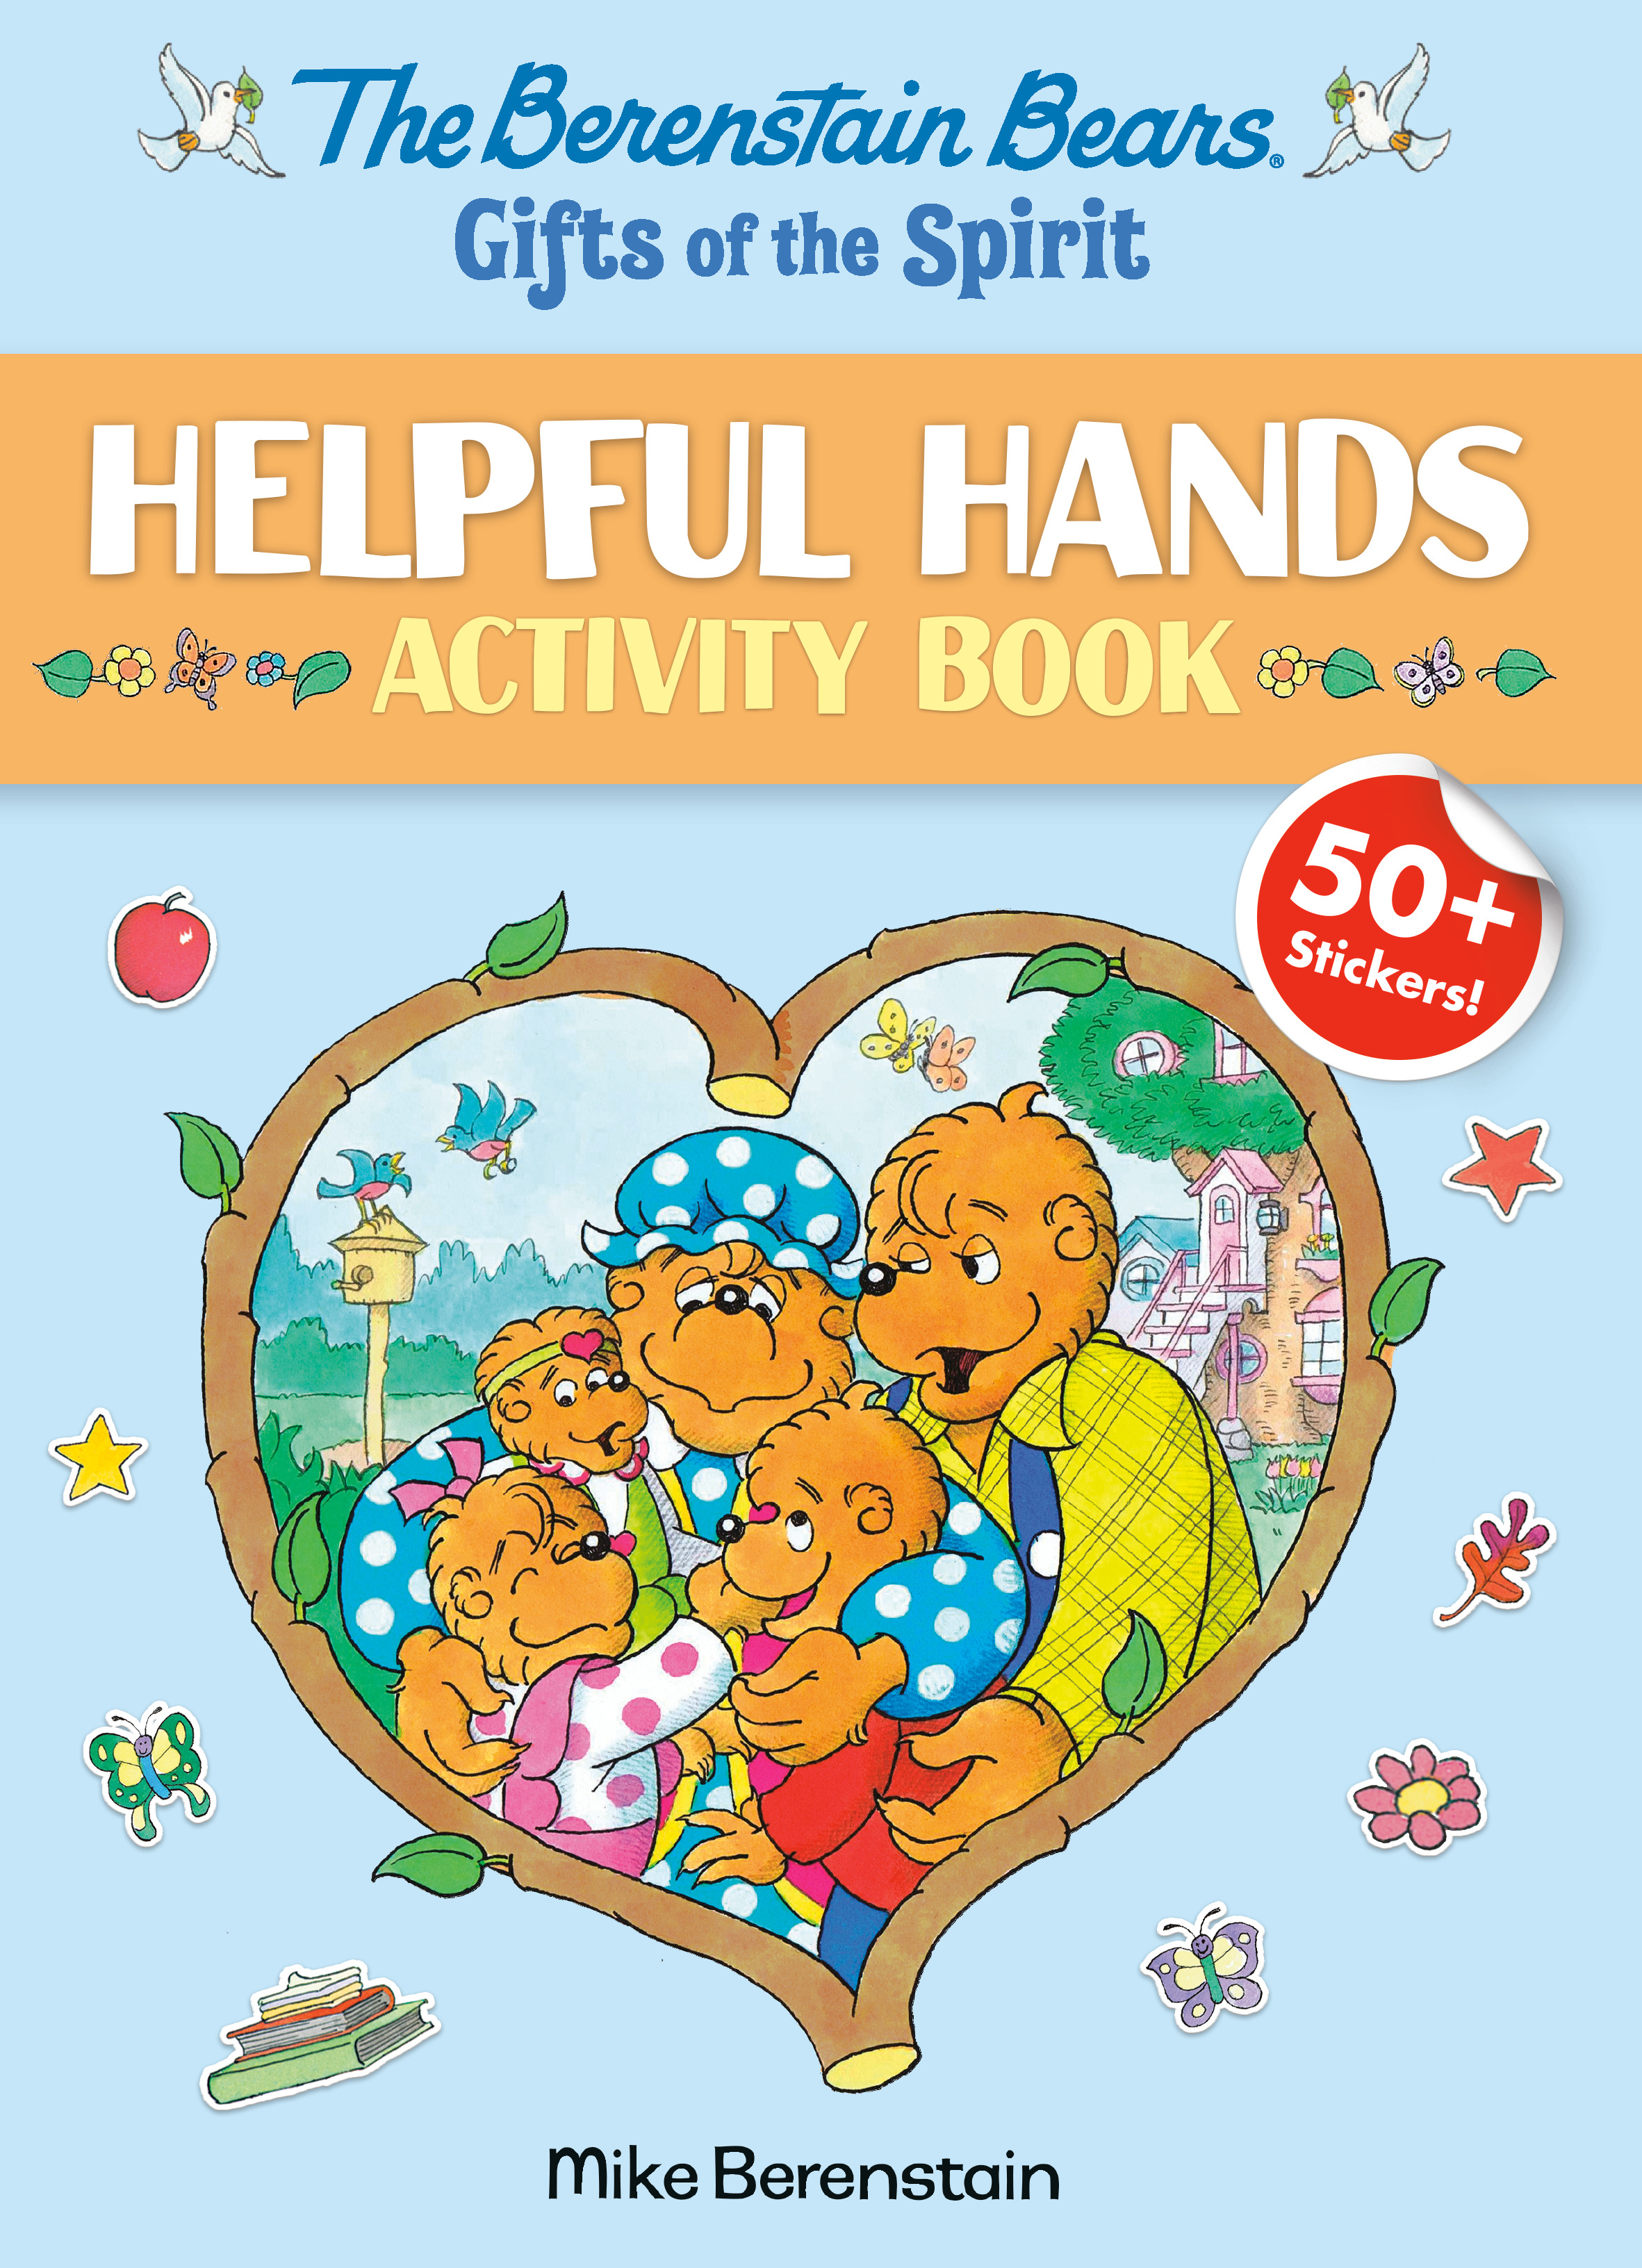 The Berenstain Bears Gifts of the Spirit Helpful Hands Activity Book (Berenstain Bears) | Activity book